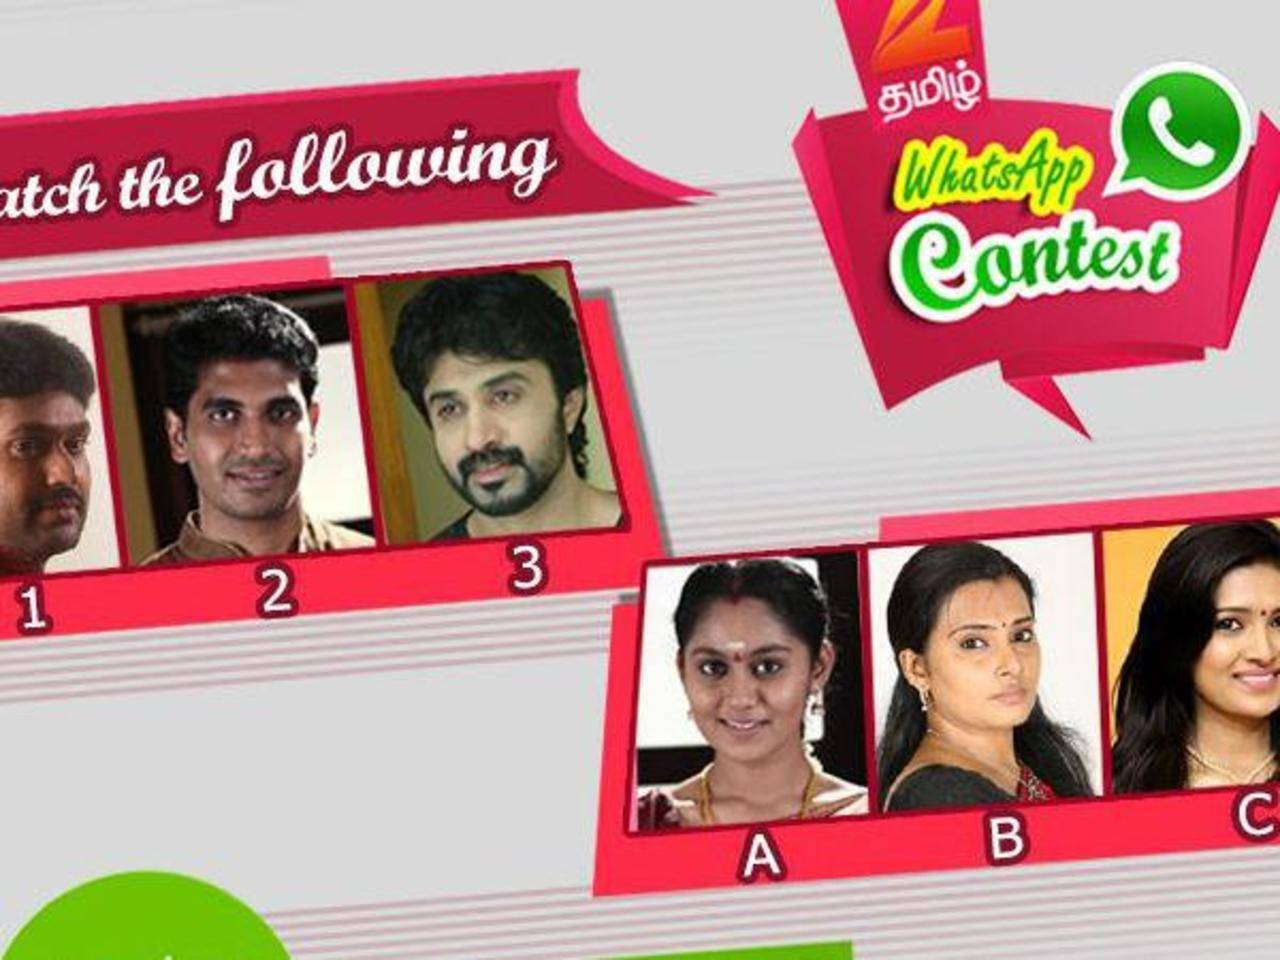 Zee Tamil whatsapp contest is back - Times of India